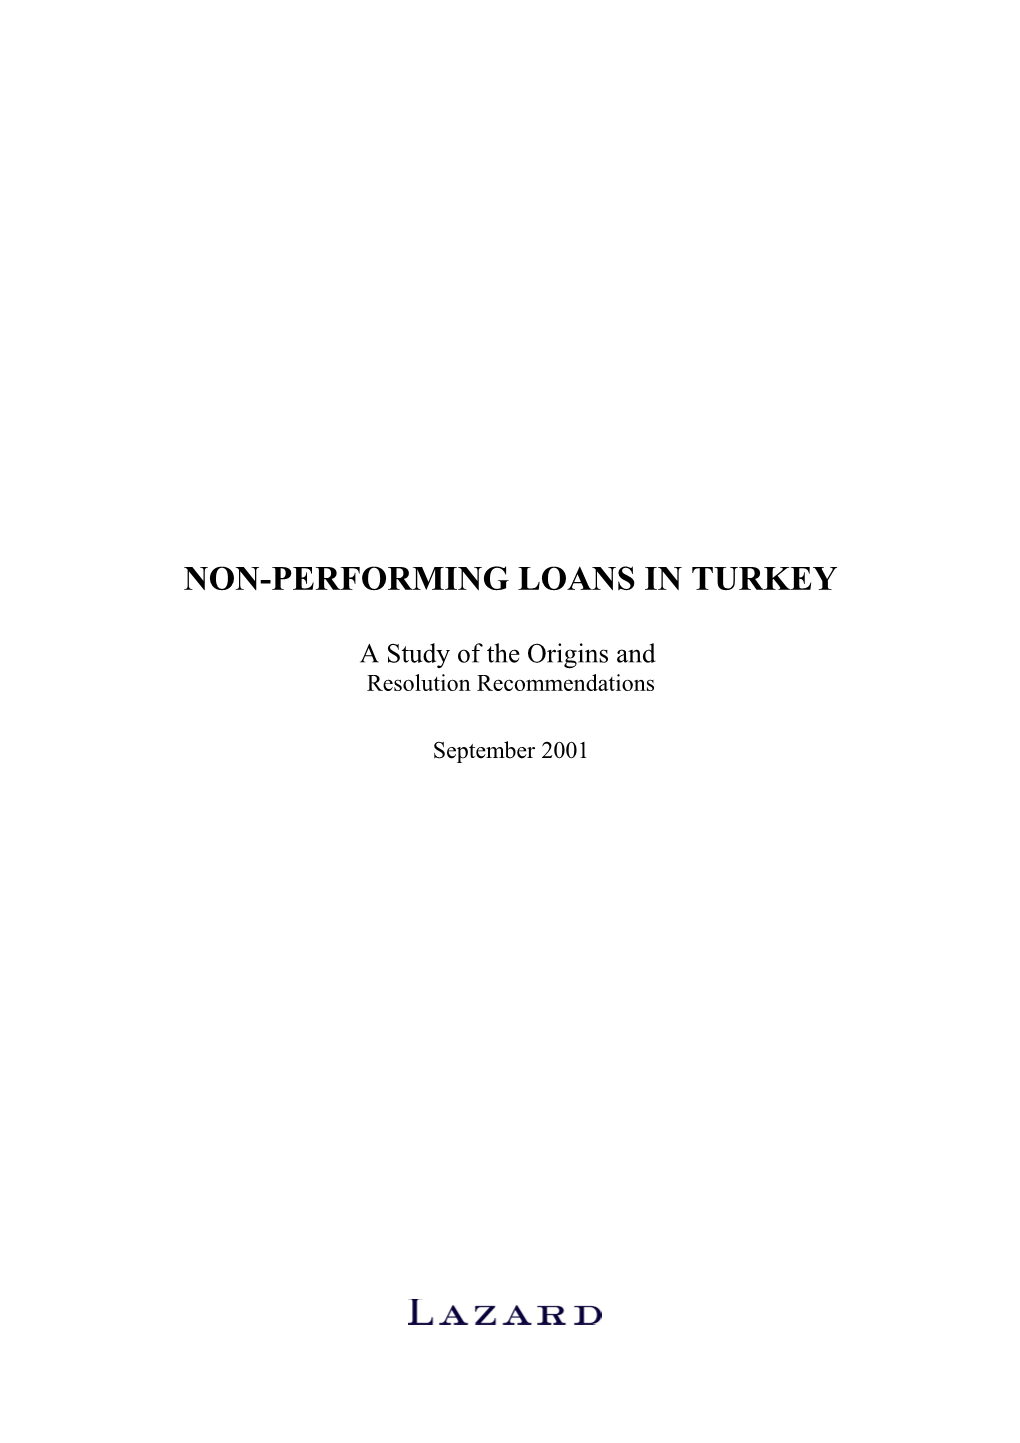 Turkey Faces a Number of Macro and Micro Issues Including